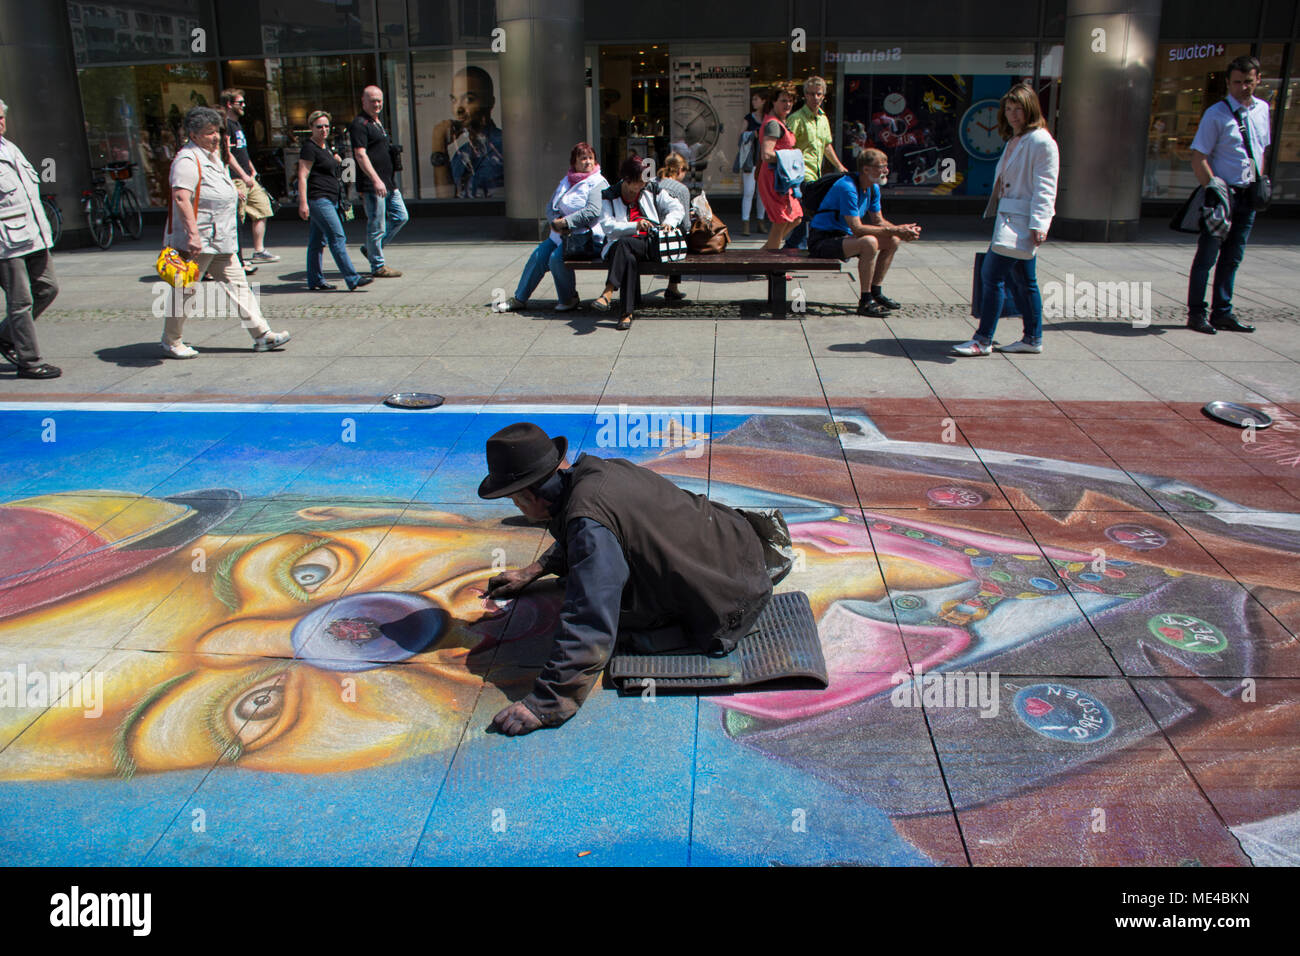 Artist painting on the ground in Dresden Saxony Germany Stock Photo